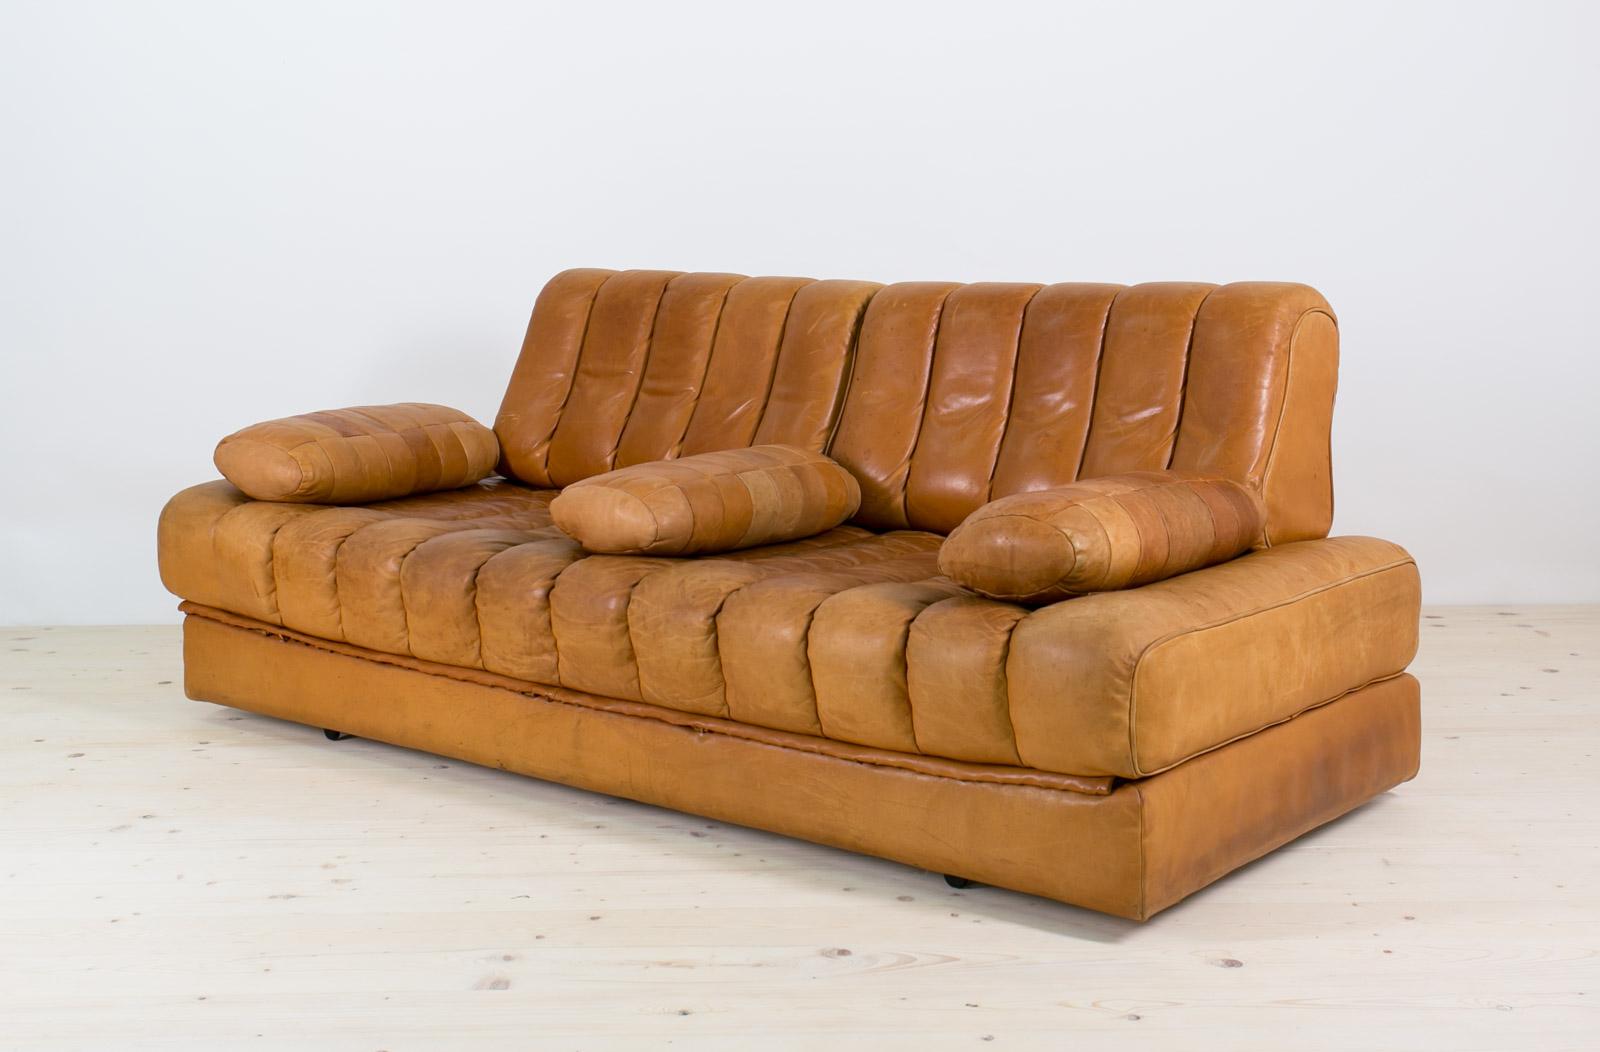 Vintage Swiss De Sede Sofa Bed from the 1960s, model DS 85 In Good Condition In Wrocław, Poland